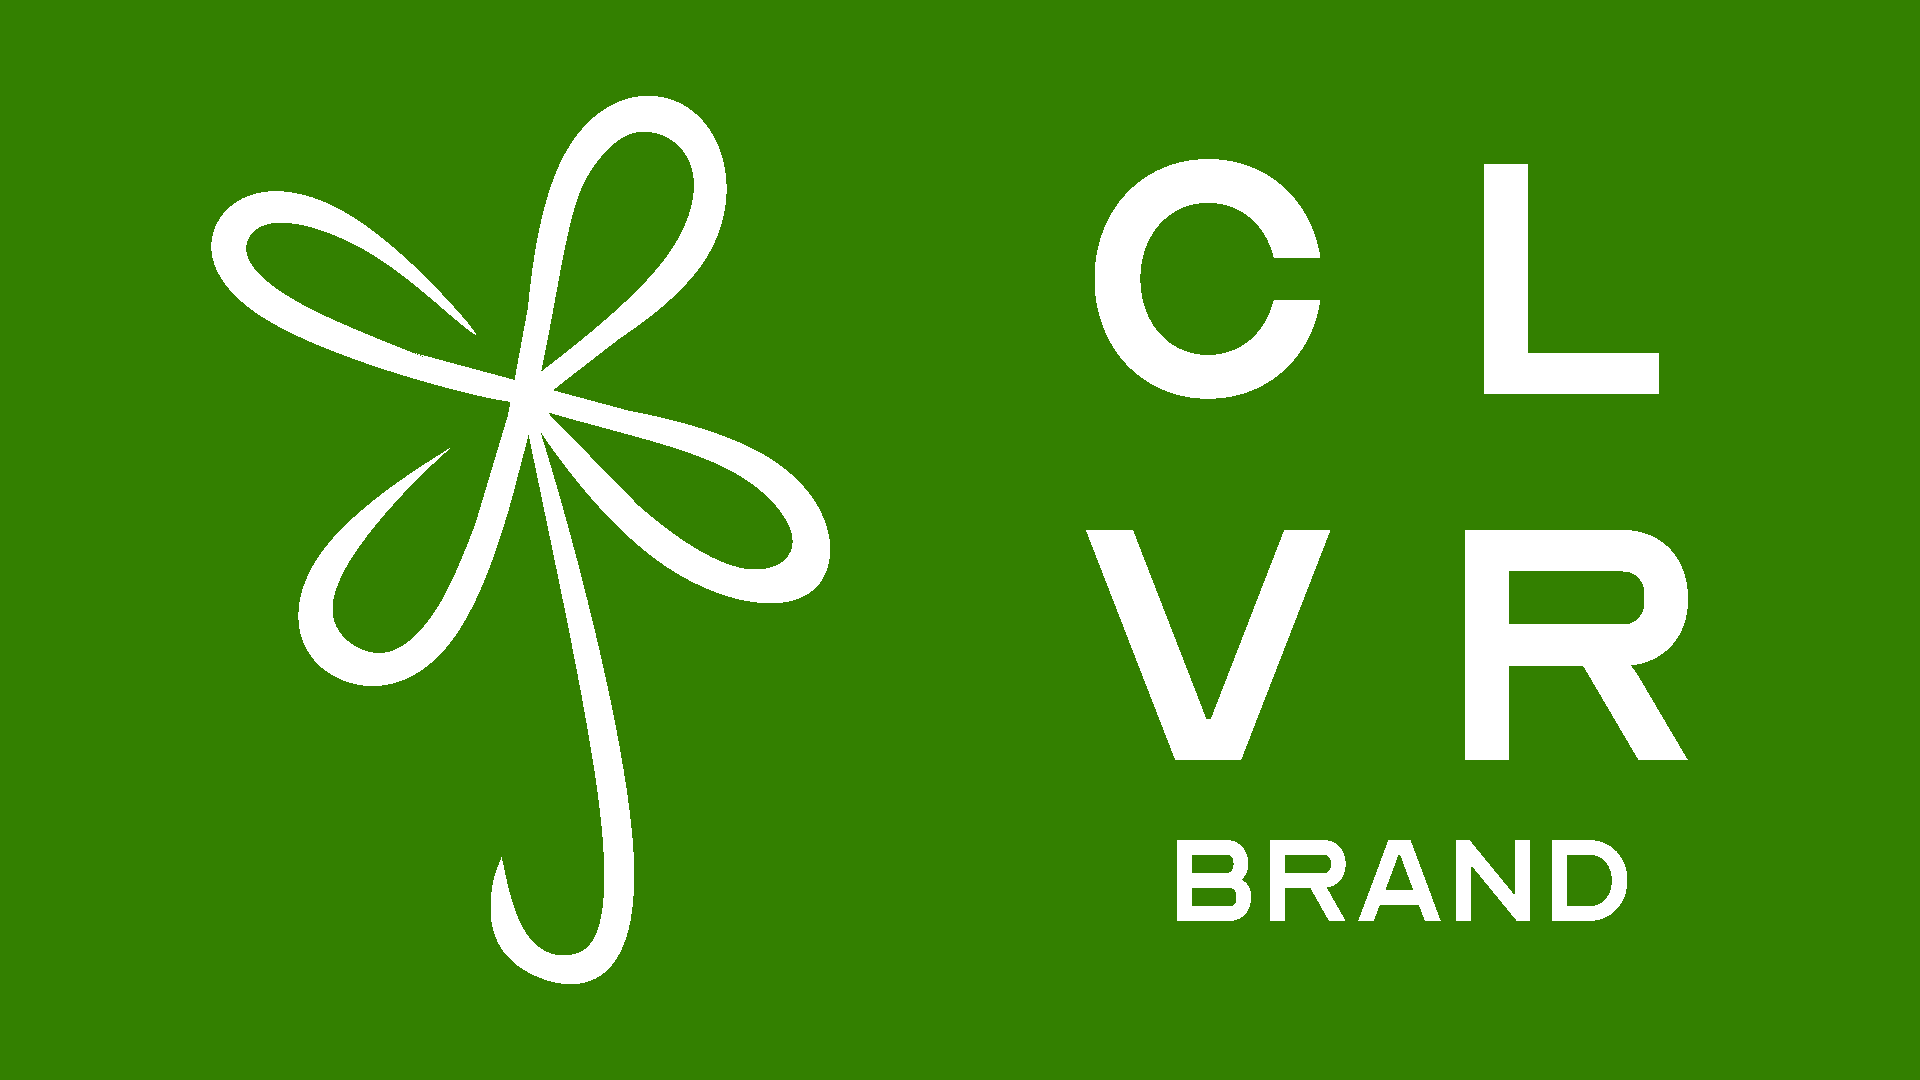 Welcome to CLVR Brand